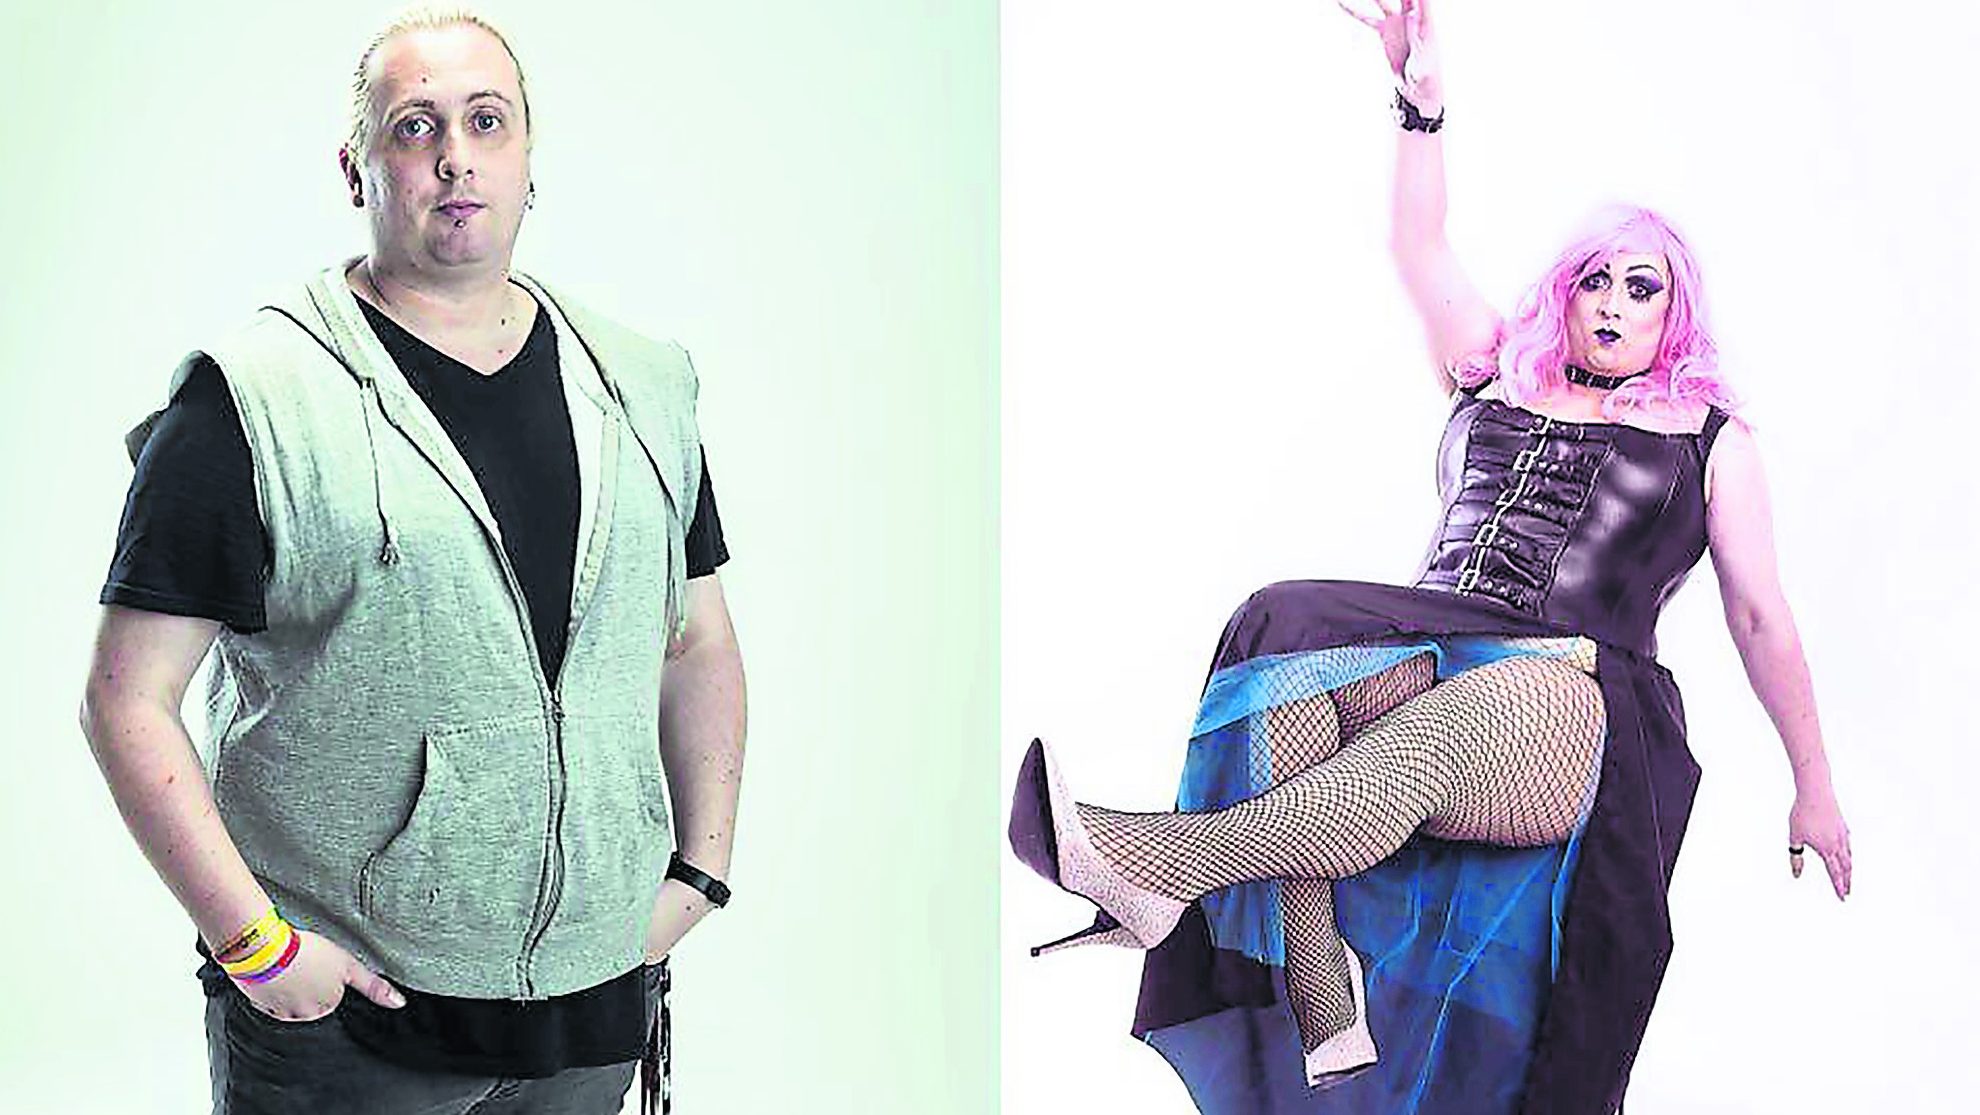 Hamish Archibald on gender fluidity, RuPaul’s hypocrisy and dressing up in drag